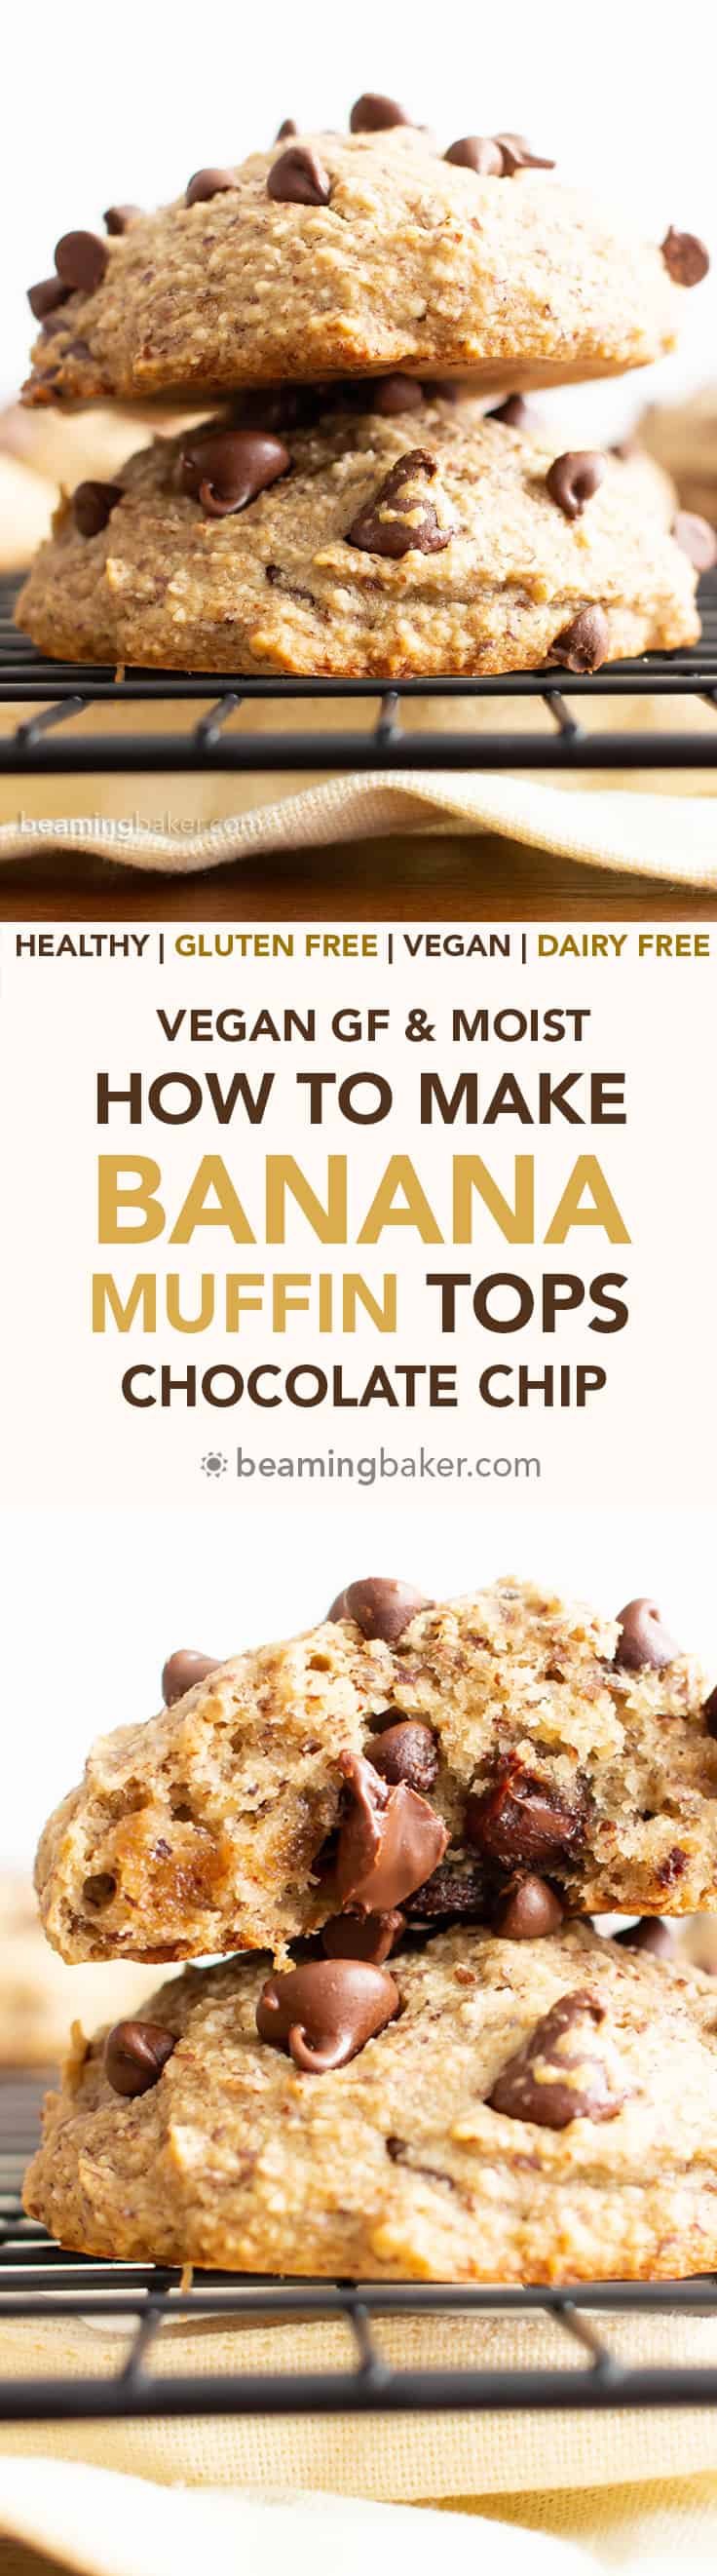 How to Make Banana Muffin Tops (V, GF): this moist vegan muffin top recipe is easy & healthy! Learn how to make banana muffin tops – gluten-free & dairy-free! #Banana #Muffin #Vegan #GlutenFree | Recipe at BeamingBaker.com